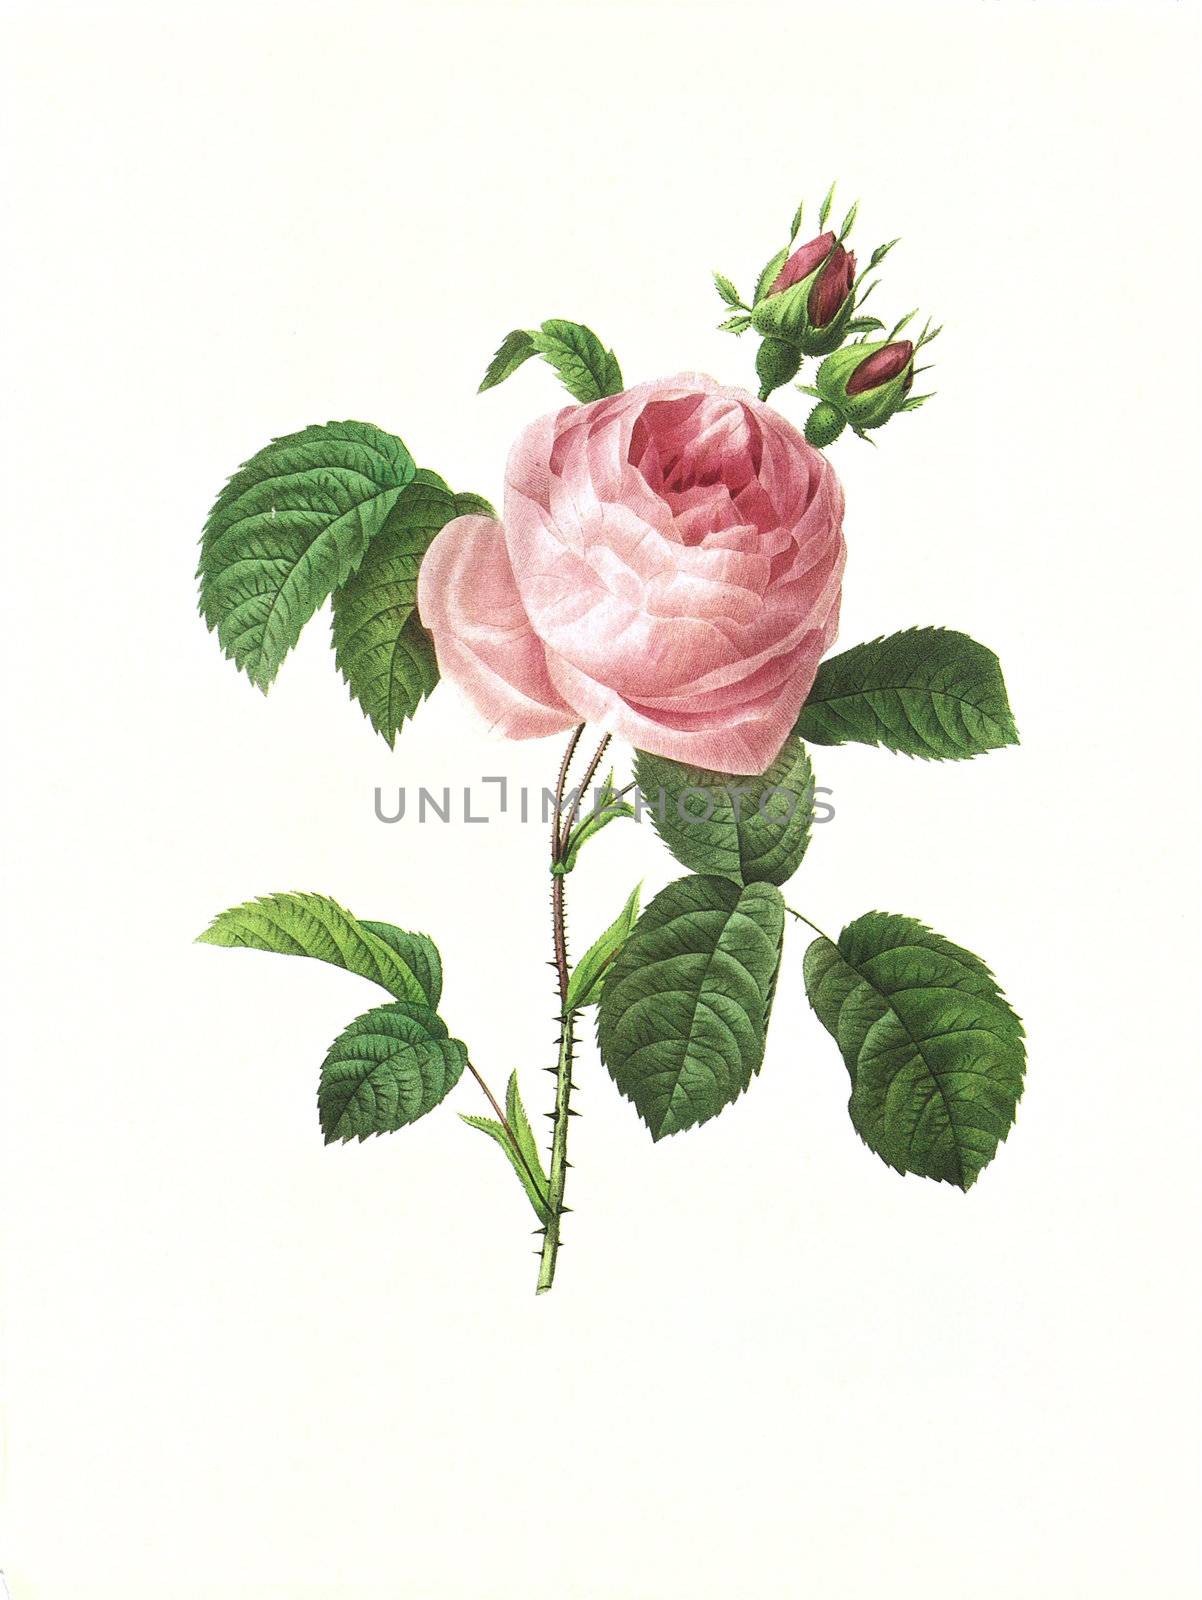 Antique illustration of a rosa centifolia engraved by Pierre-Joseph Redoute (1759 - 1840), nicknamed "The Raphael of flowers".